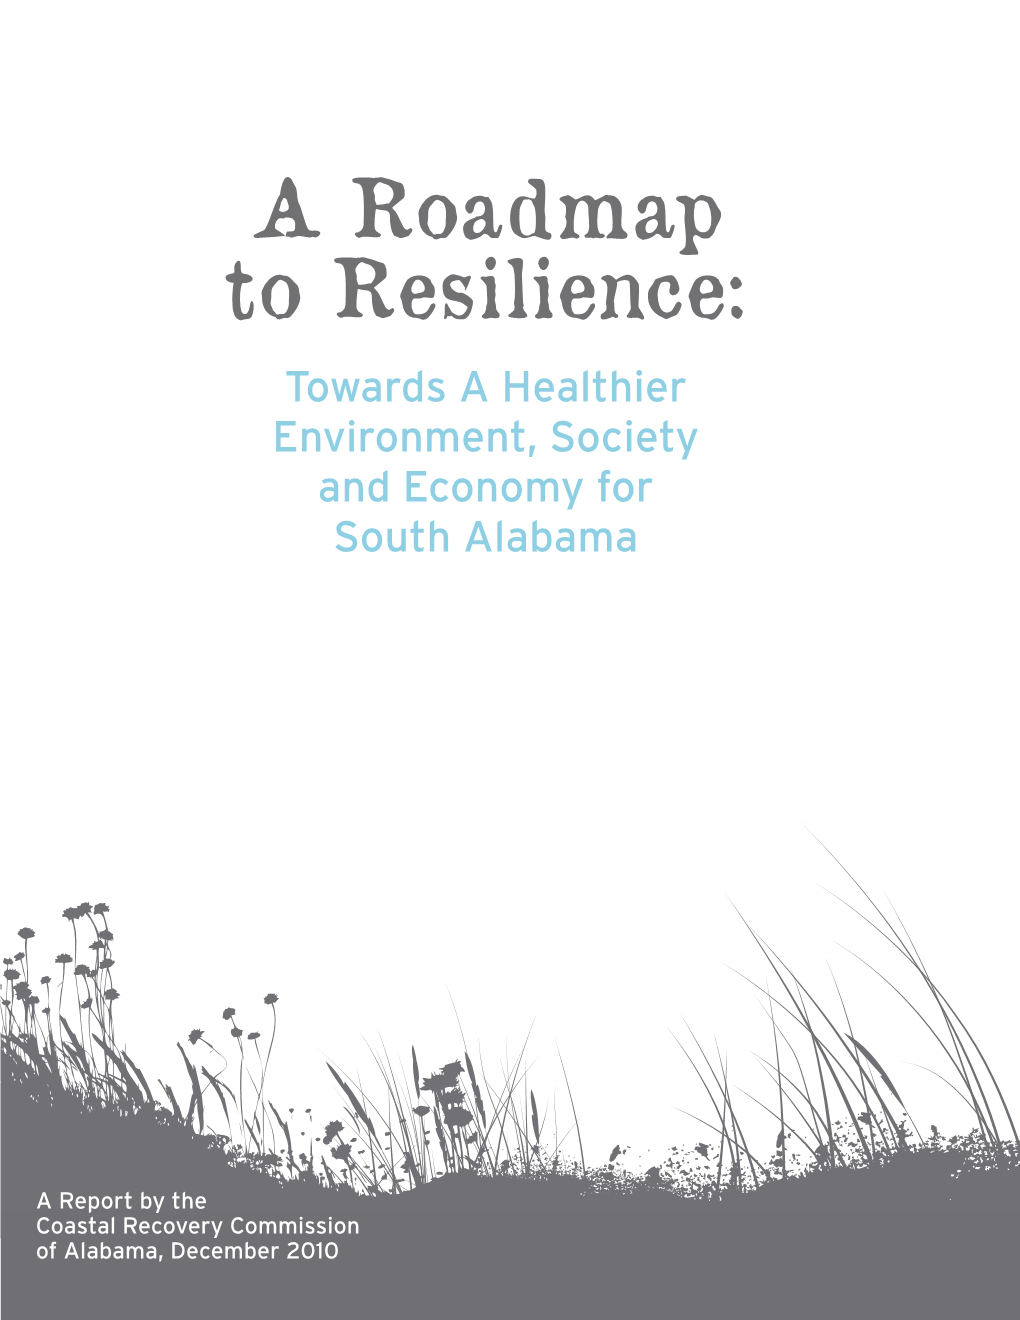 A Roadmap to Resilience: Towards a Healthier Environment, Society and Economy for South Alabama